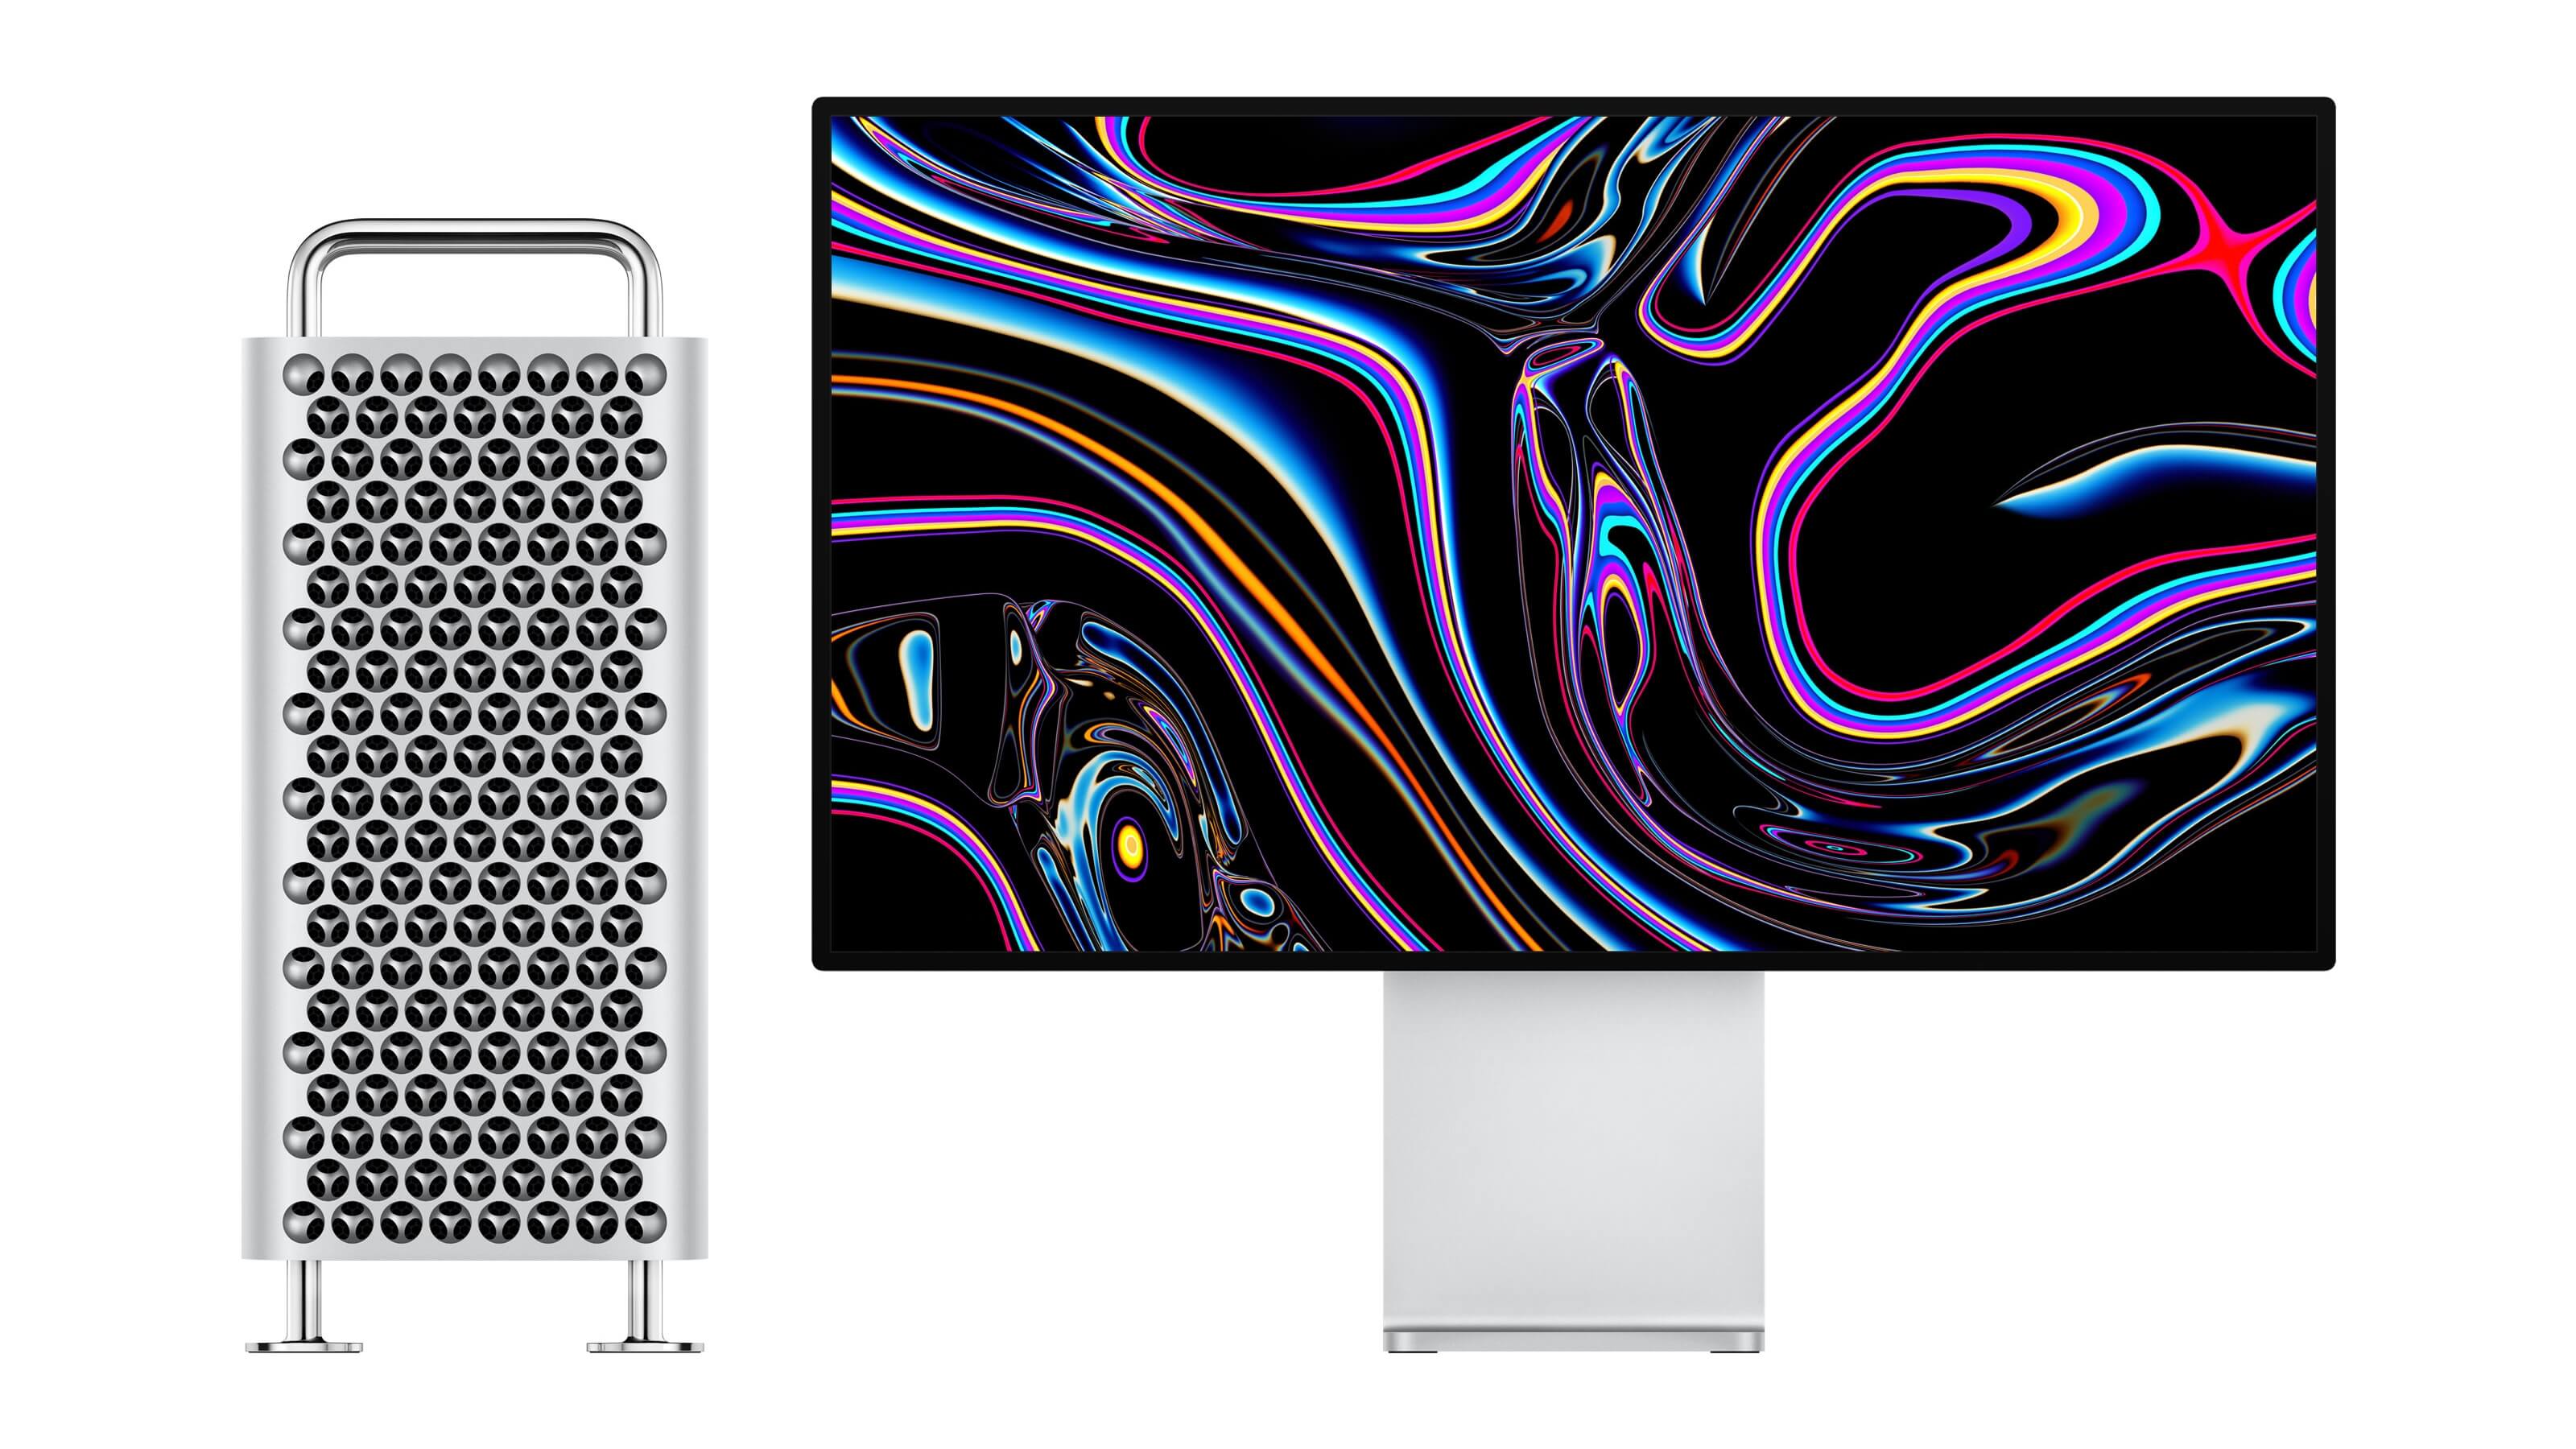 Apple Mac Pro and Pro Display XDR